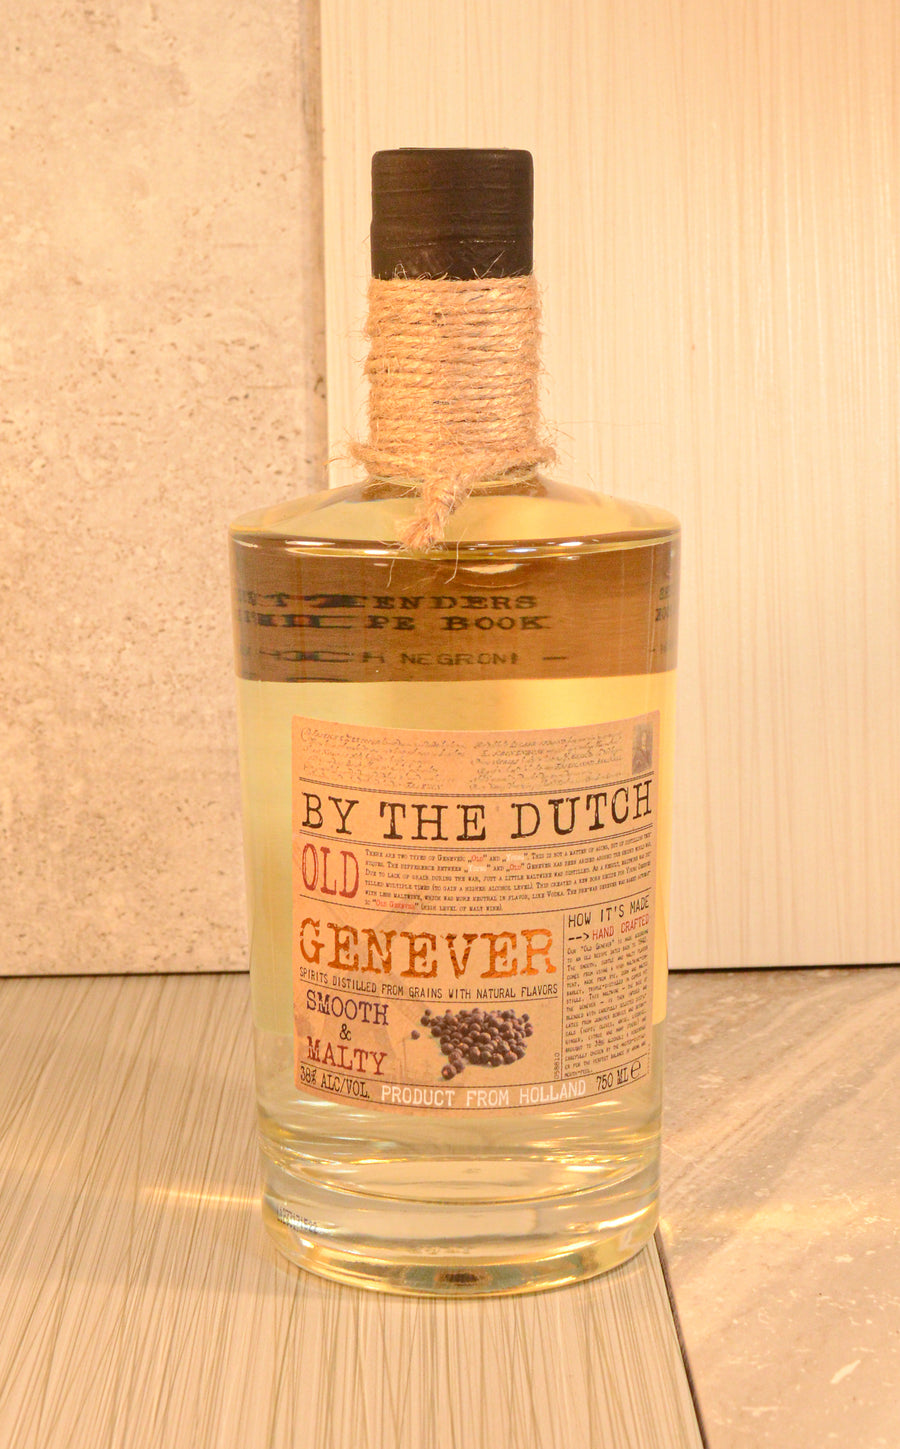 By The Dutch, Old Genever